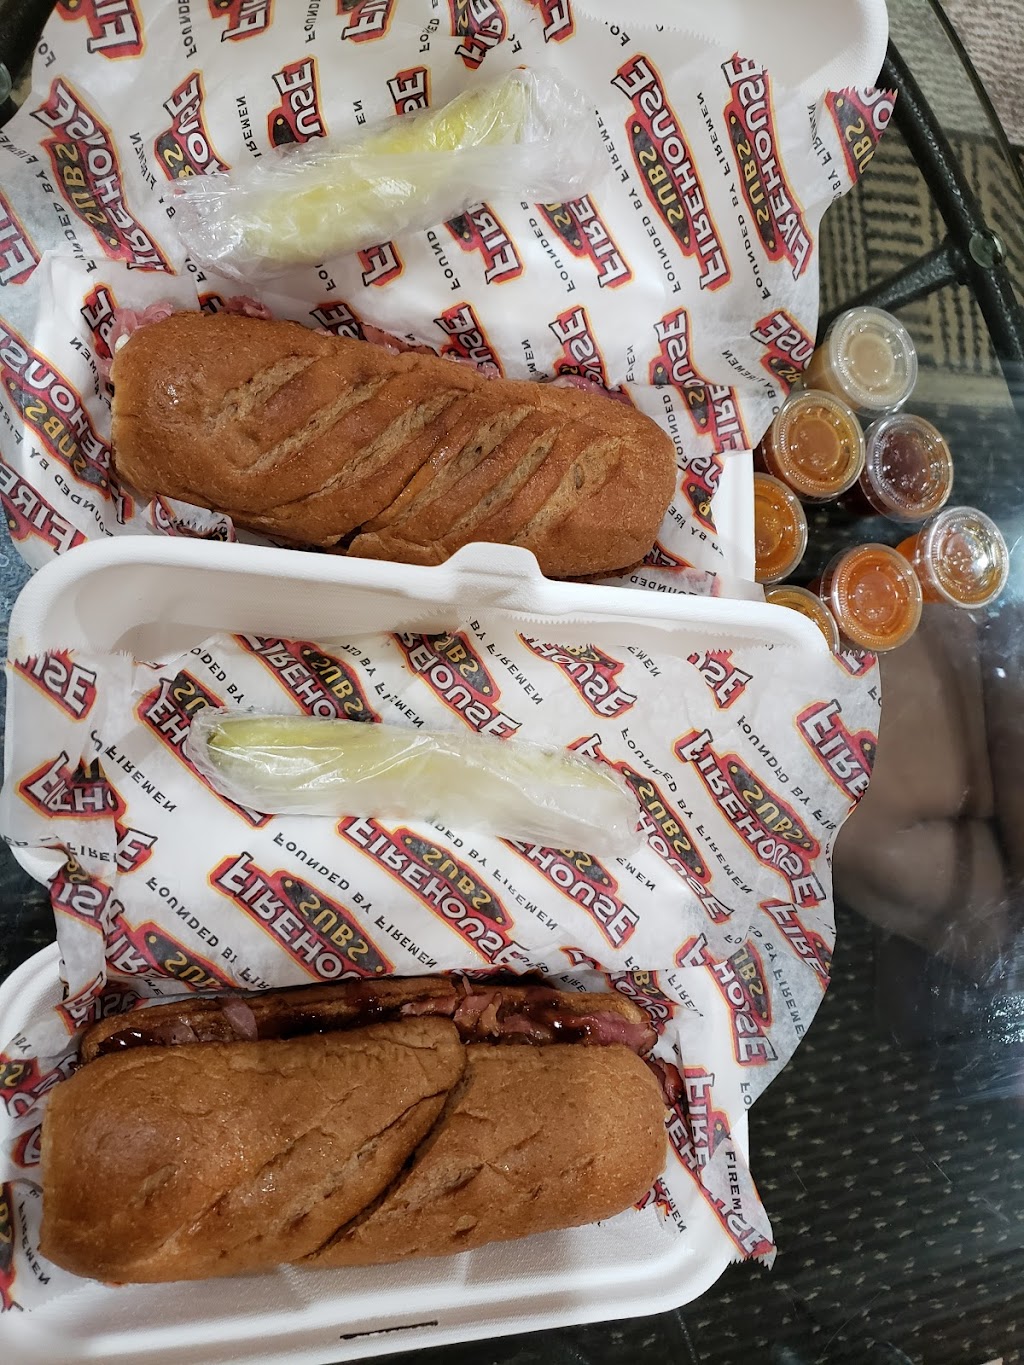 Firehouse Subs Crain Highway Retail Center | 2875 Crain Hwy, Waldorf, MD 20601, USA | Phone: (240) 448-5542